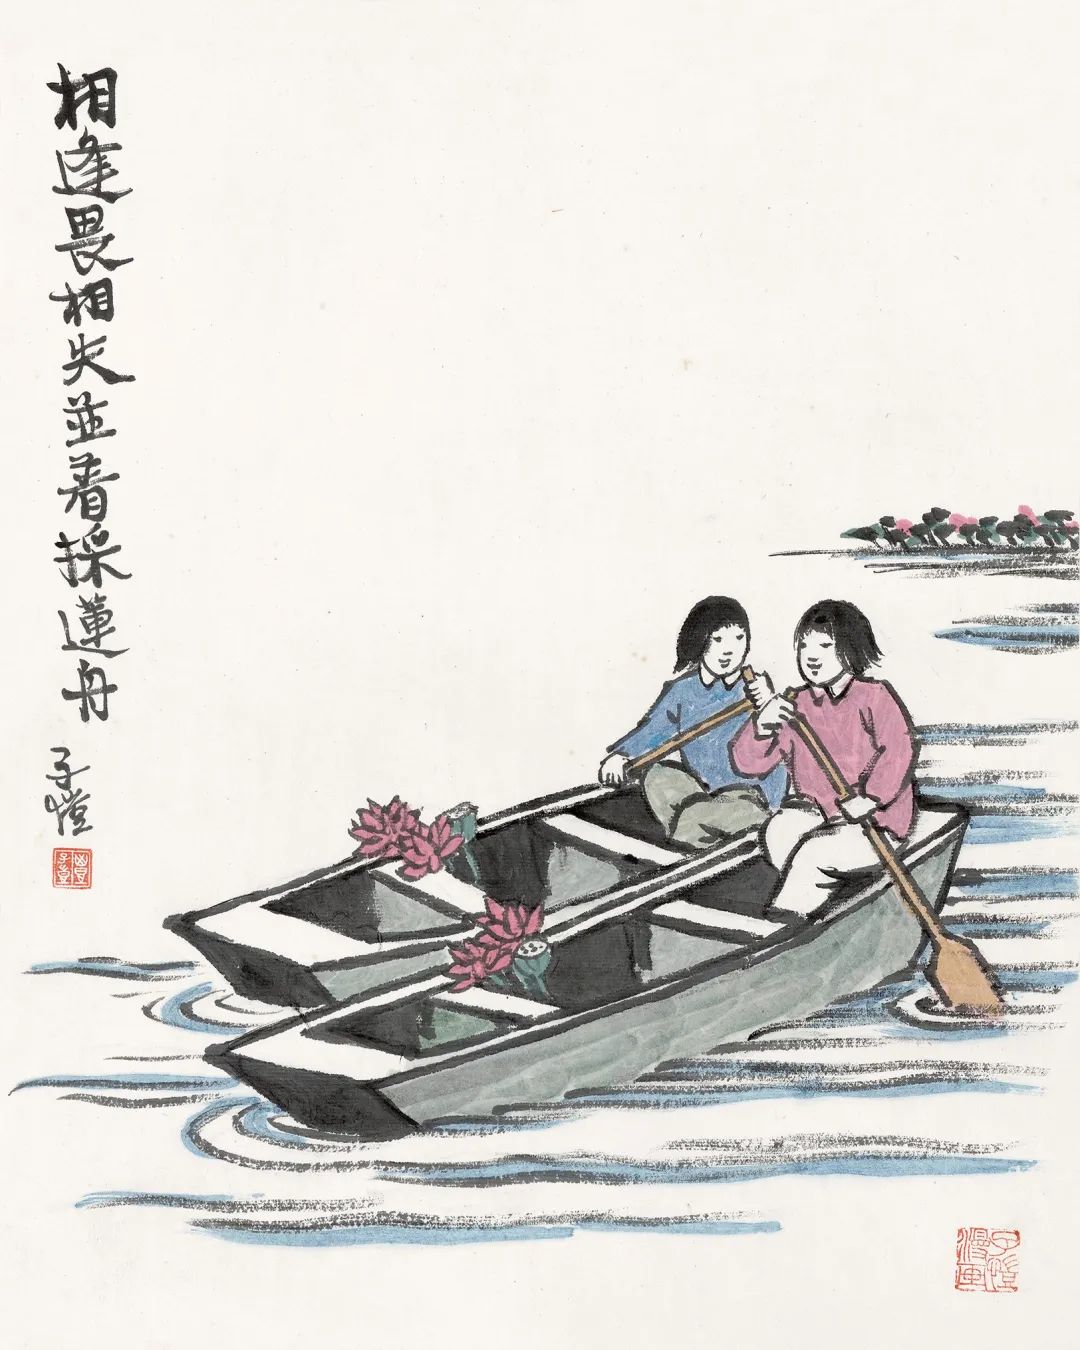 Feng Zikai, co-authored with the lotus-picking boat page, collected by Zhejiang Provincial Museum, color on paper, vertical 34.5 cm, horizontal 27.5 cm